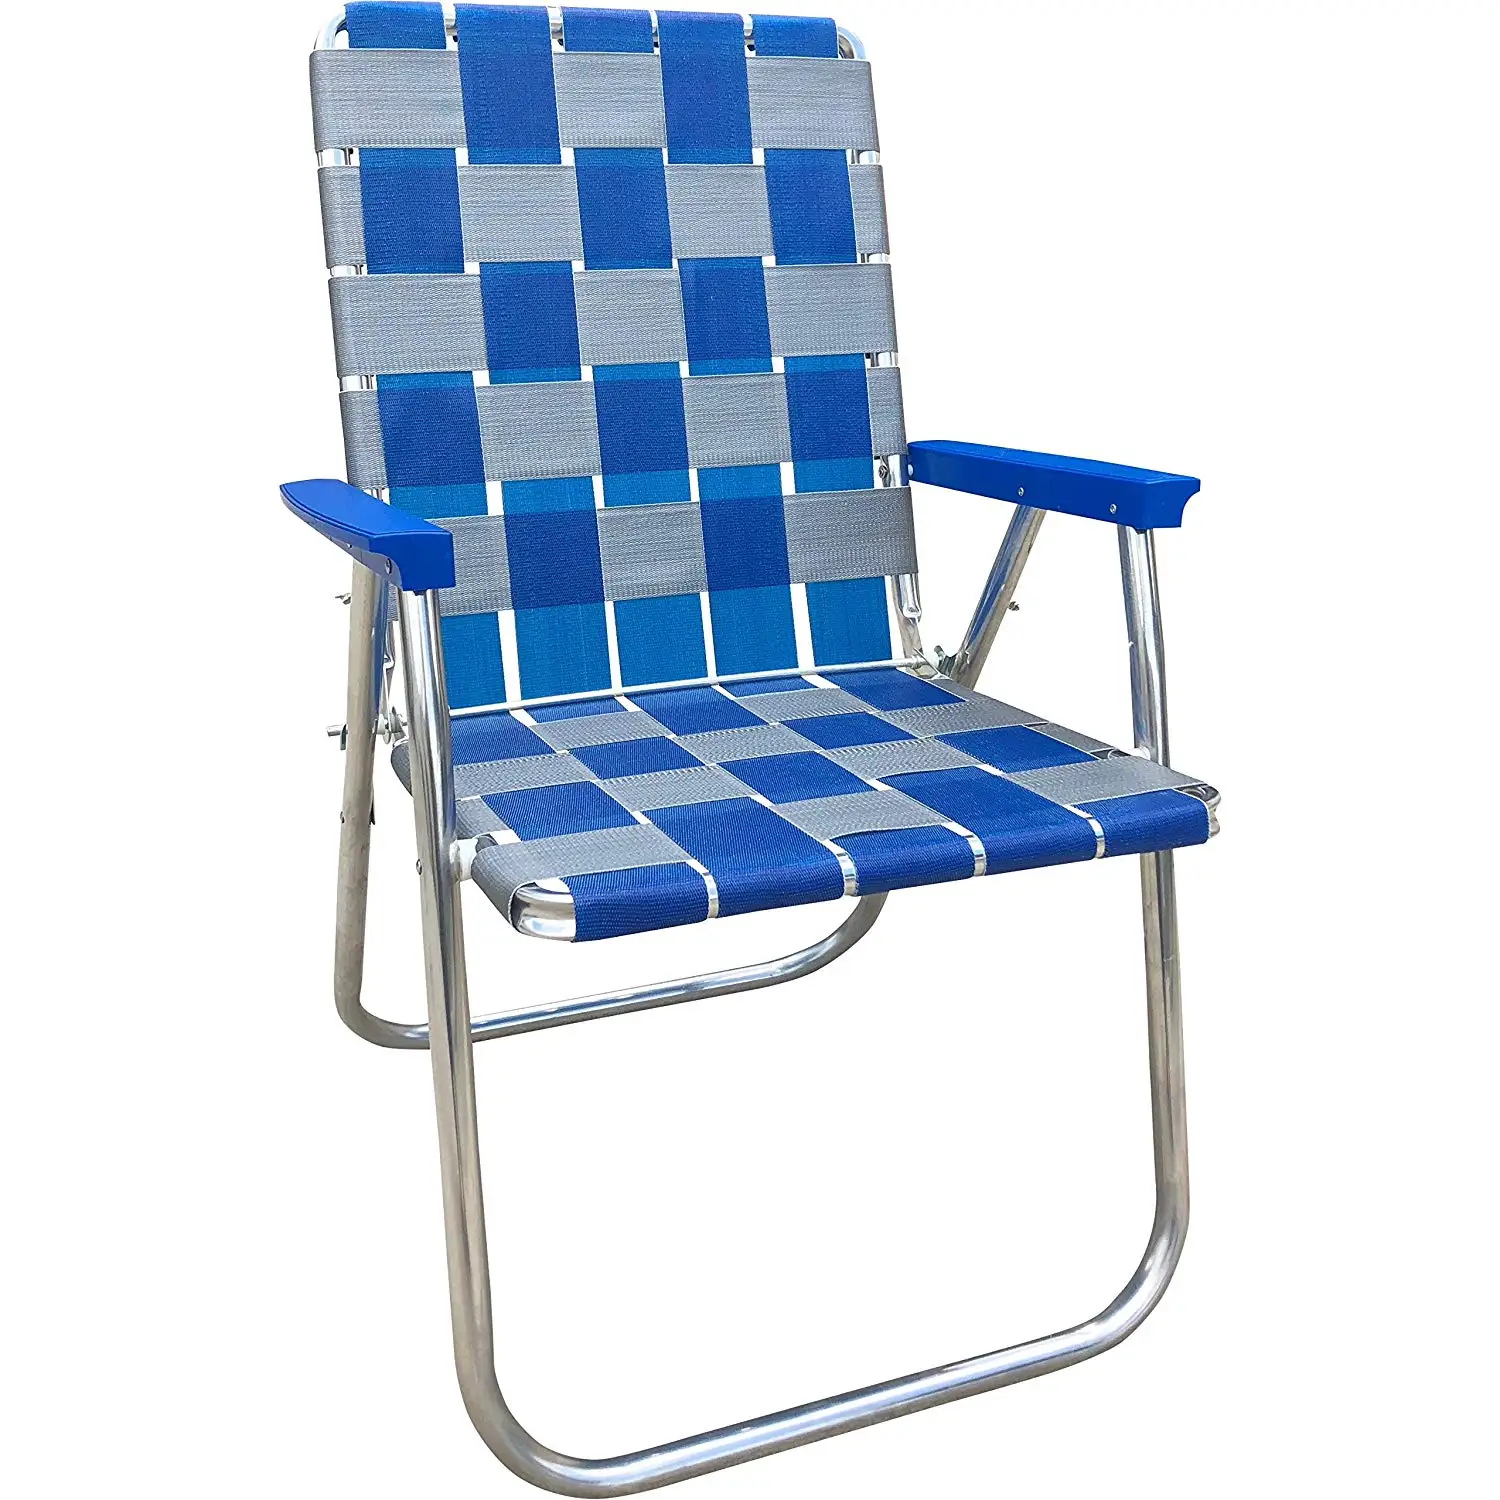 cheap antique lawn chairs find antique lawn chairs deals on